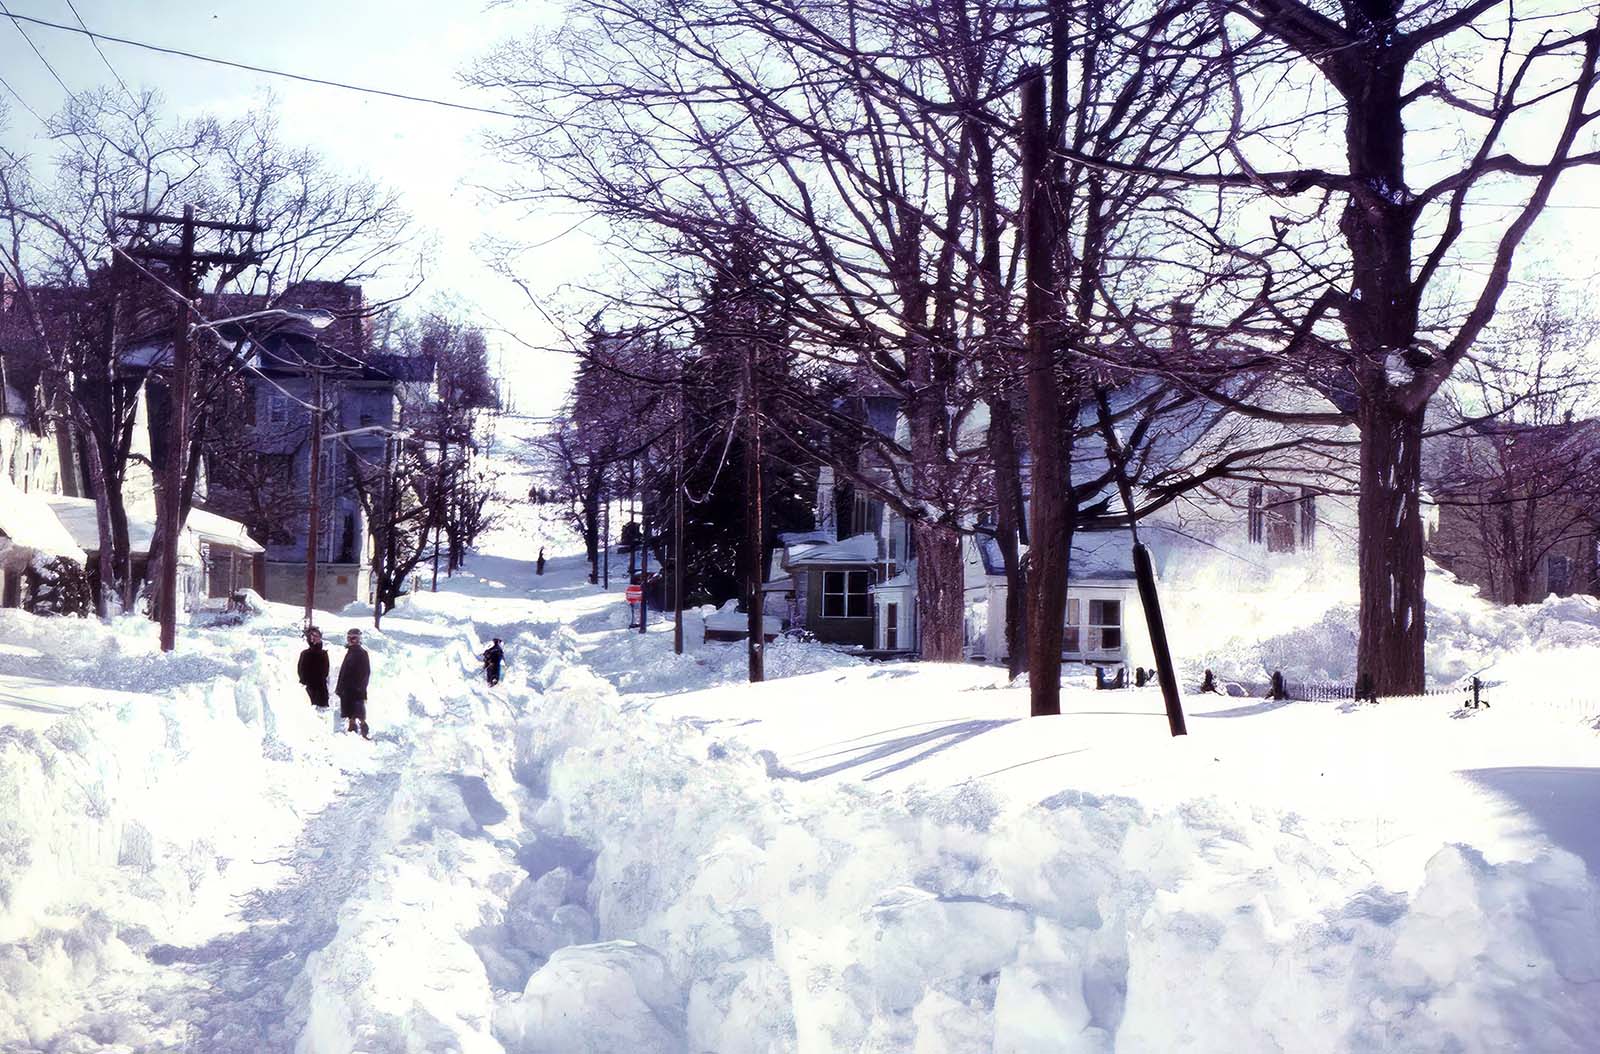 The Blizzard of 1978: Frozen Snapshots from the Historic Storm That Slammed the Northeastern US